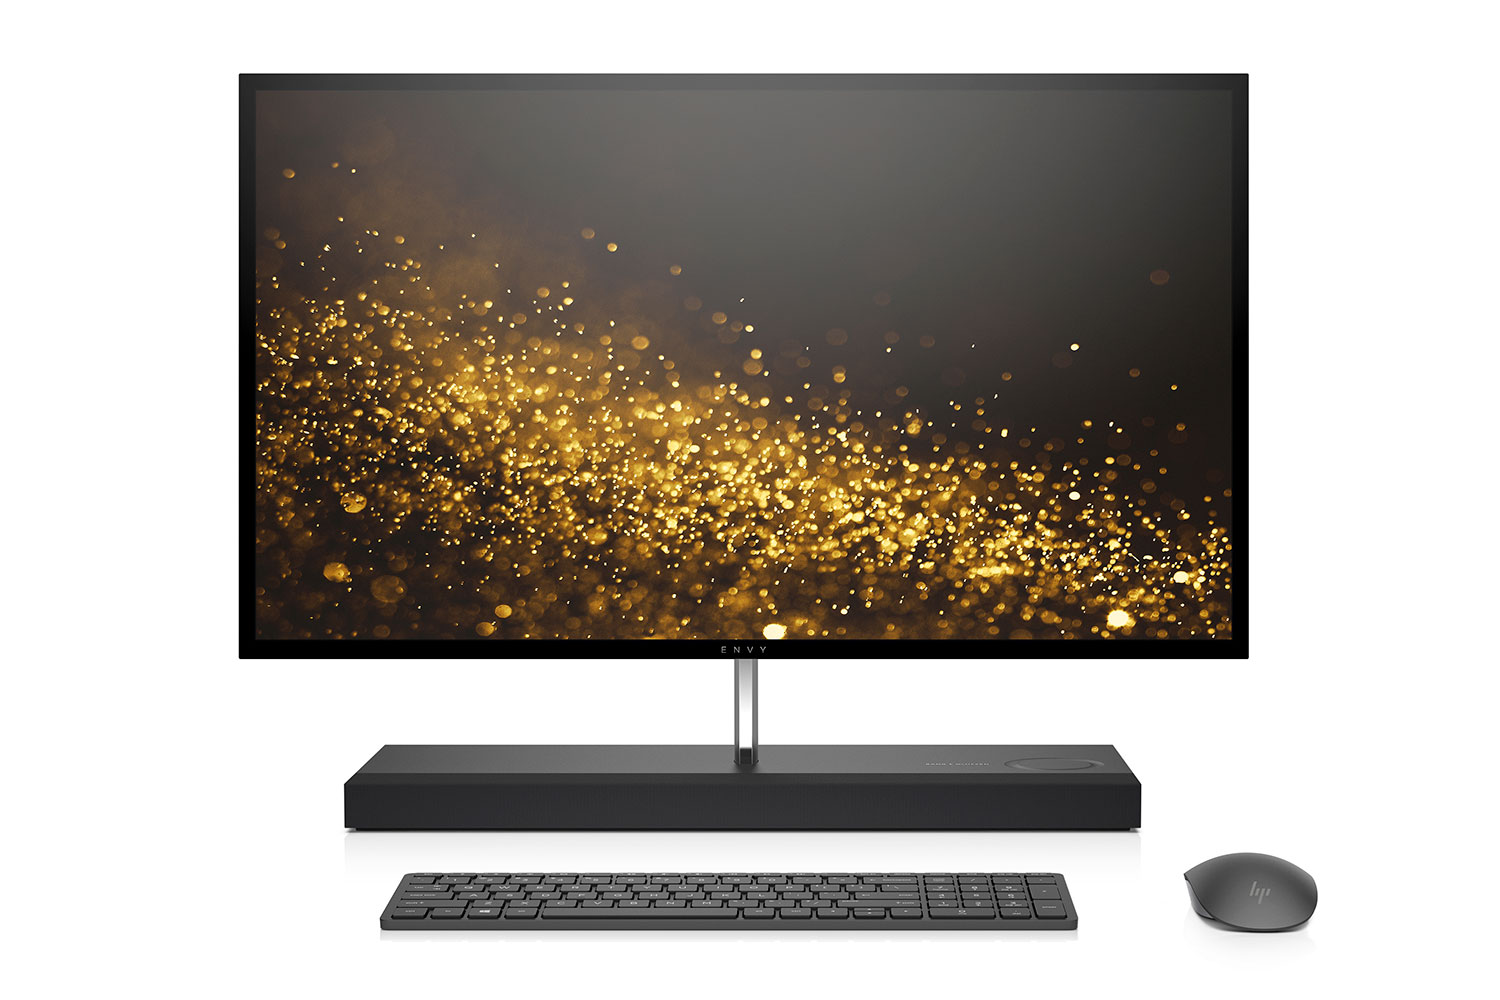 HP Envy All-in-one 27